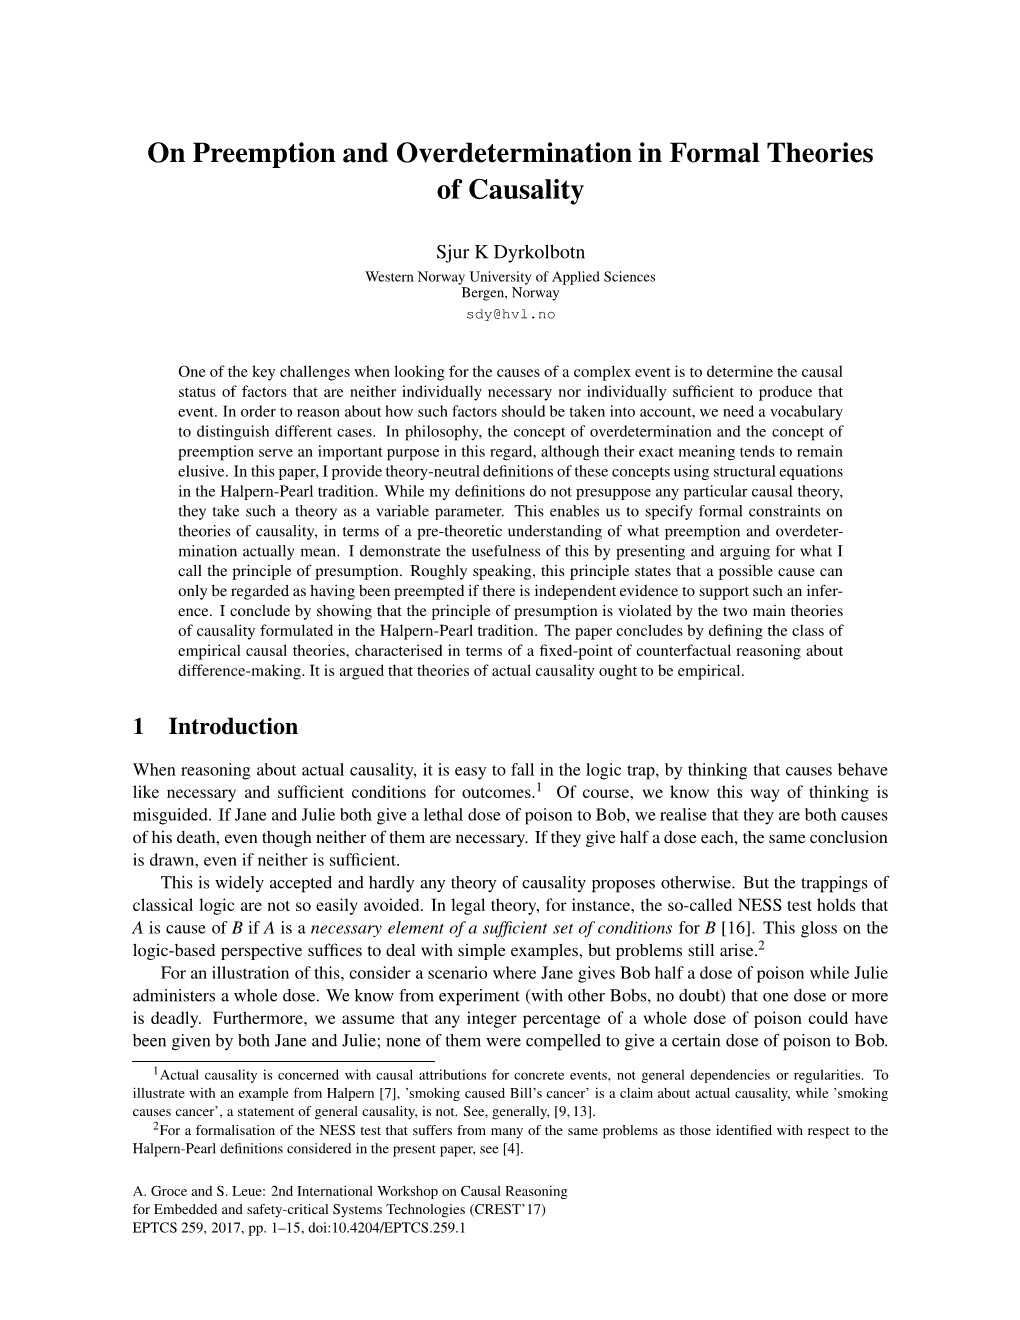 On Preemption and Overdetermination in Formal Theories of Causality